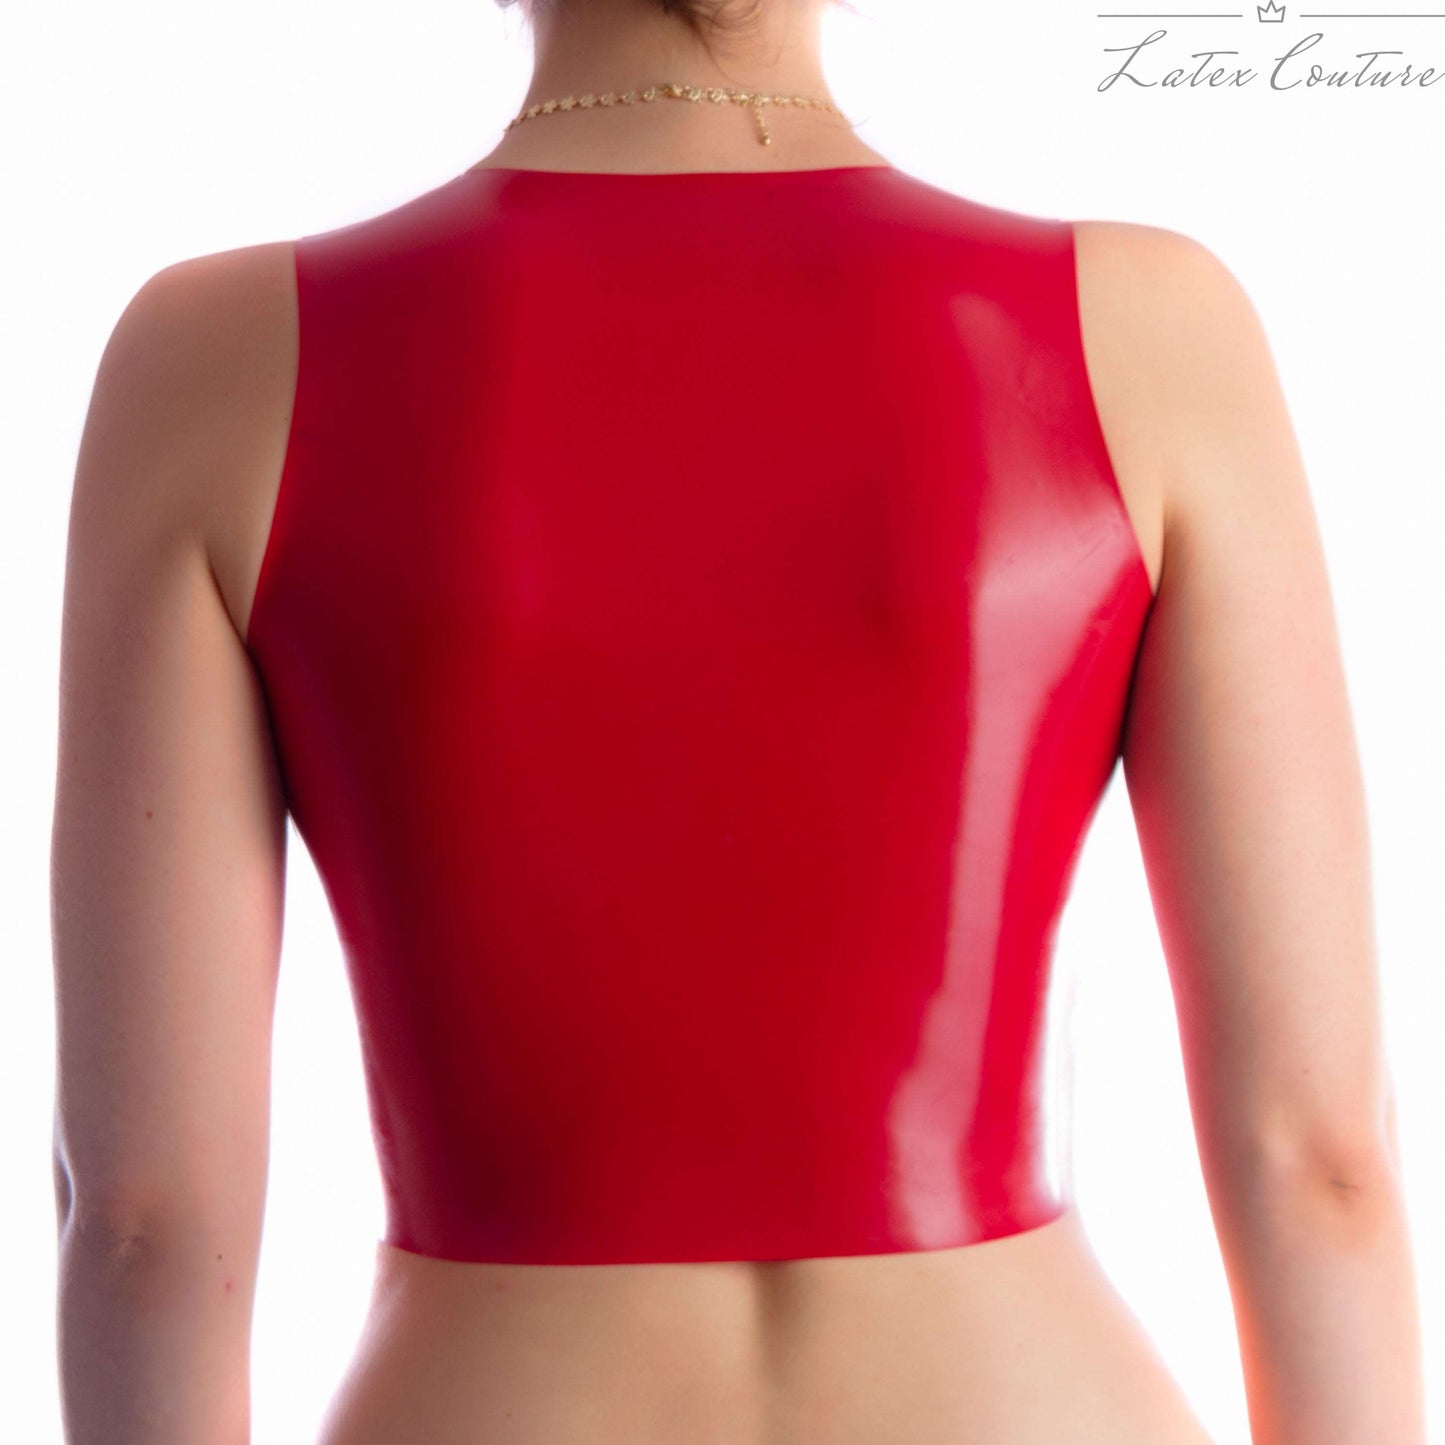 Latex Crop Top - Latex V Neck Crop Top - Latex Couture